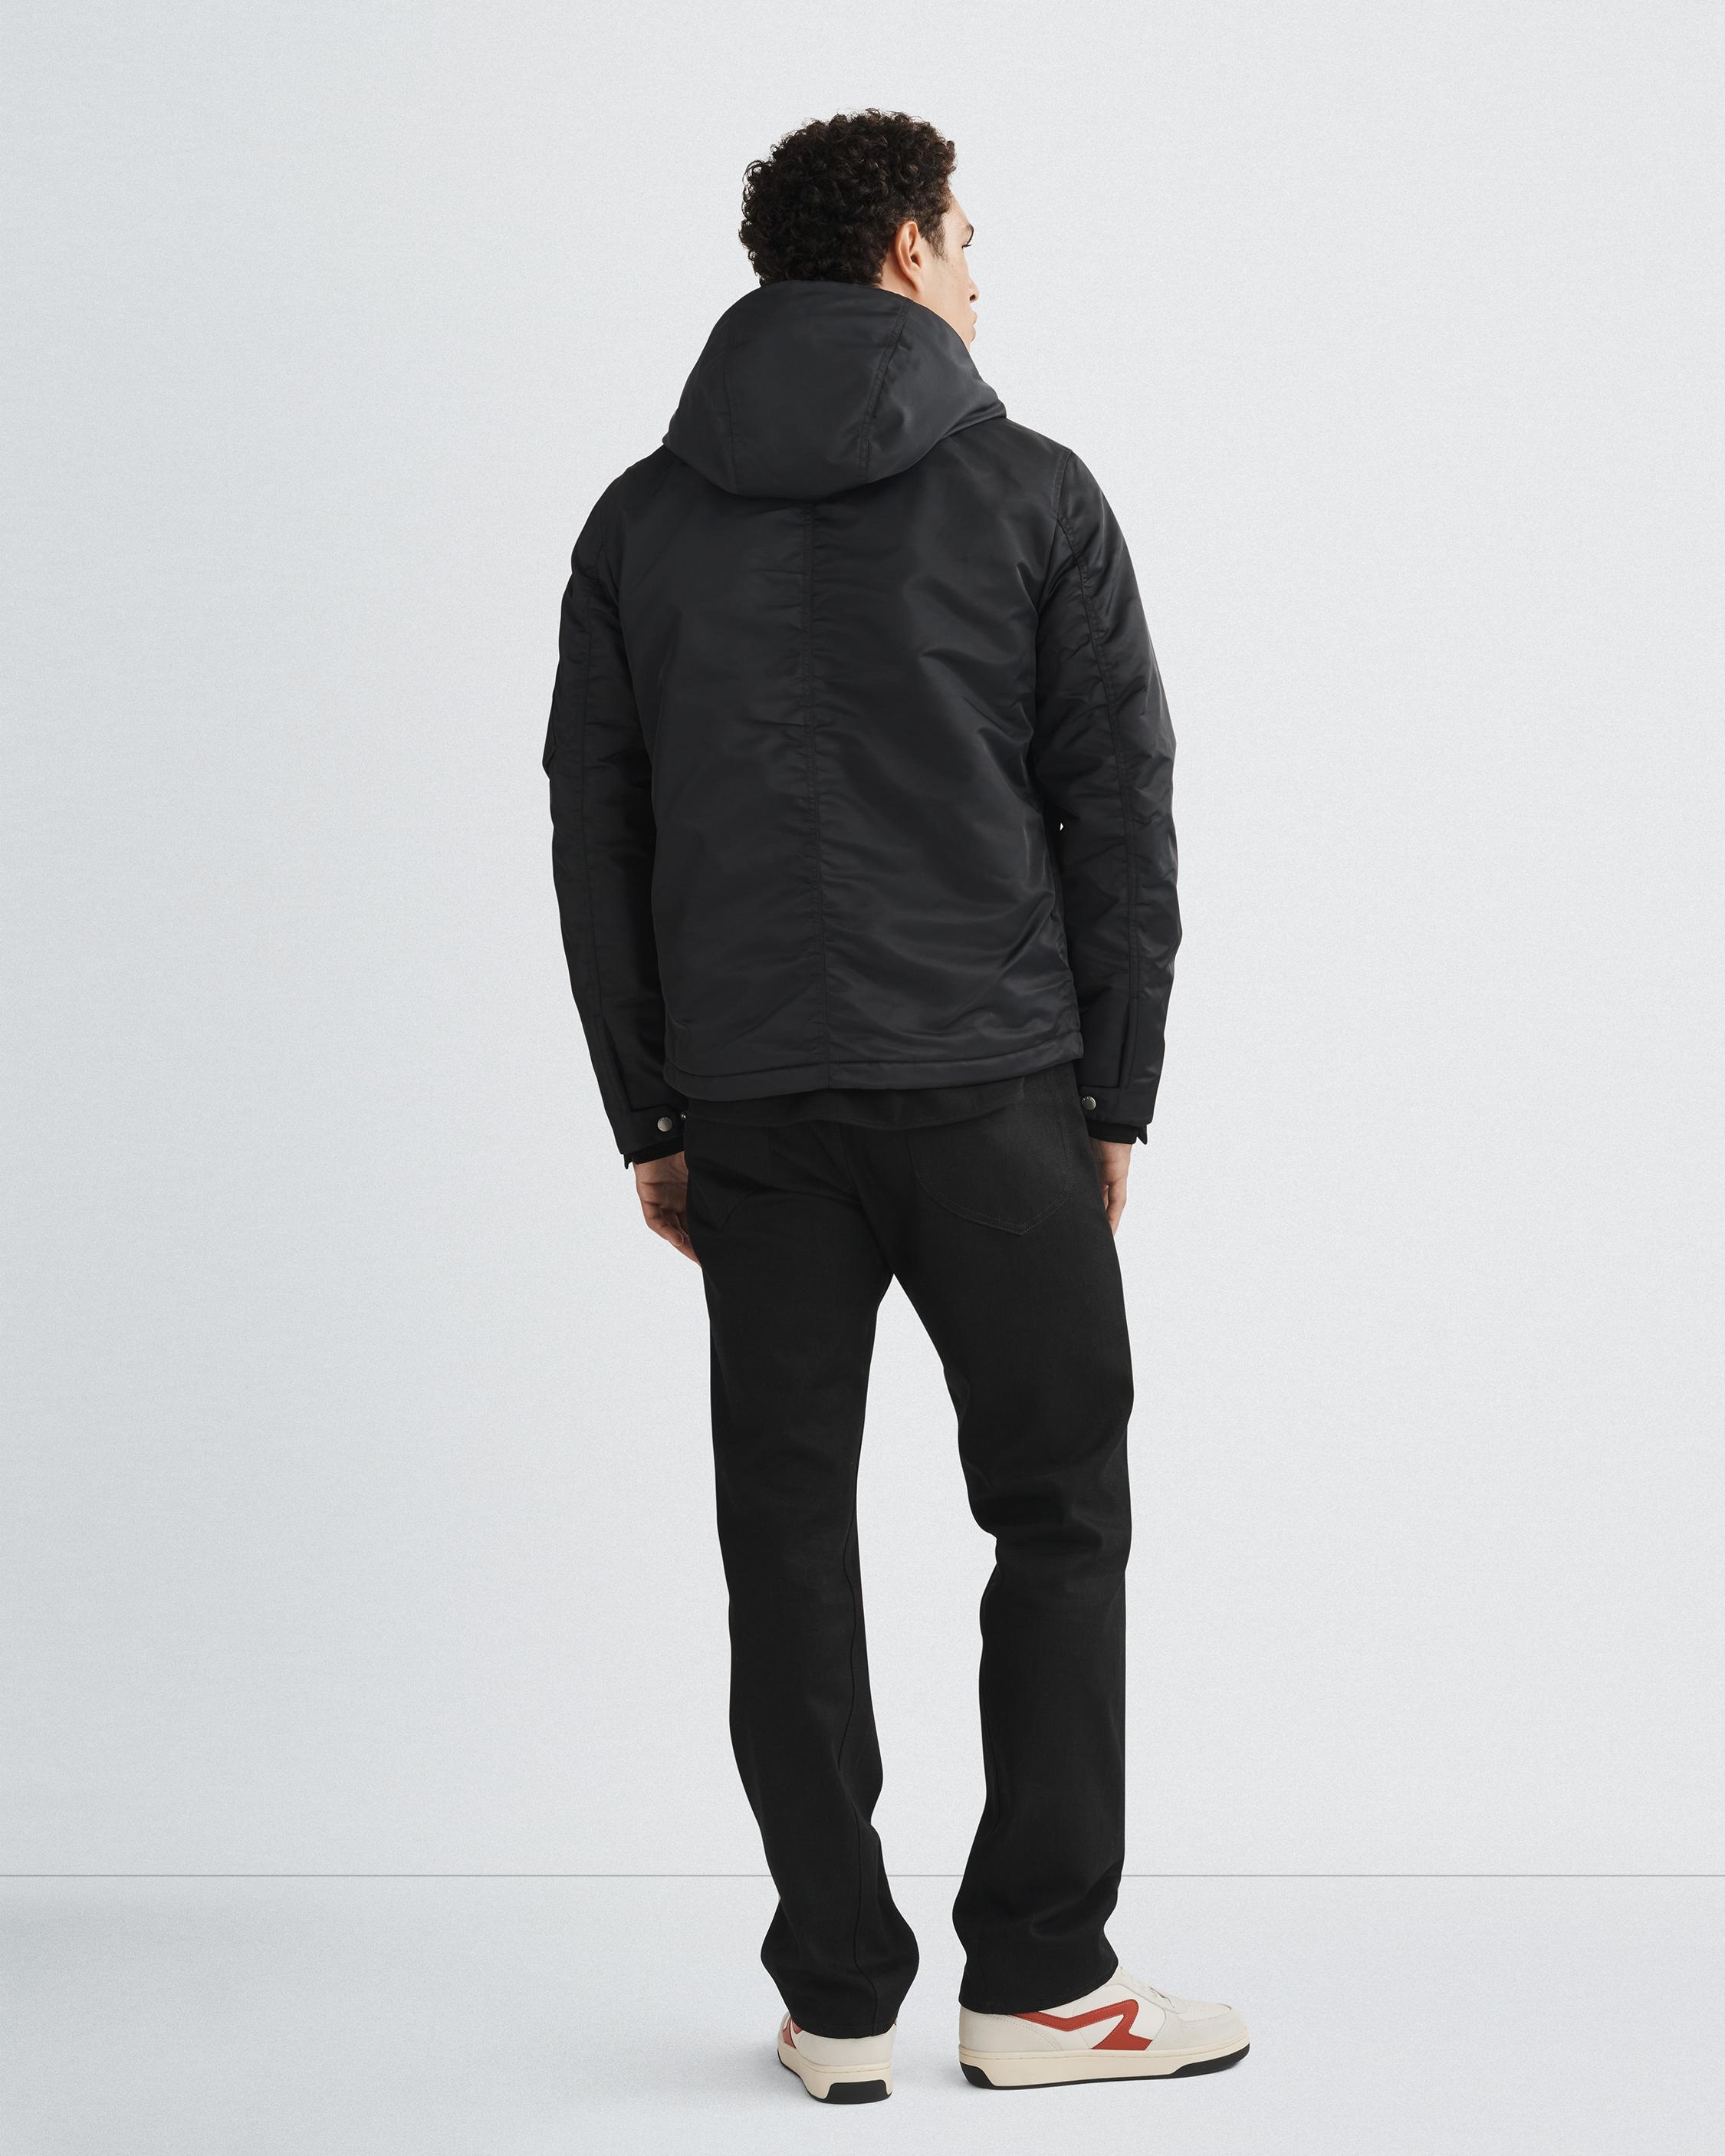 Manston Recycled Nylon Tactic Jacket
Relaxed Fit Jacket - 5